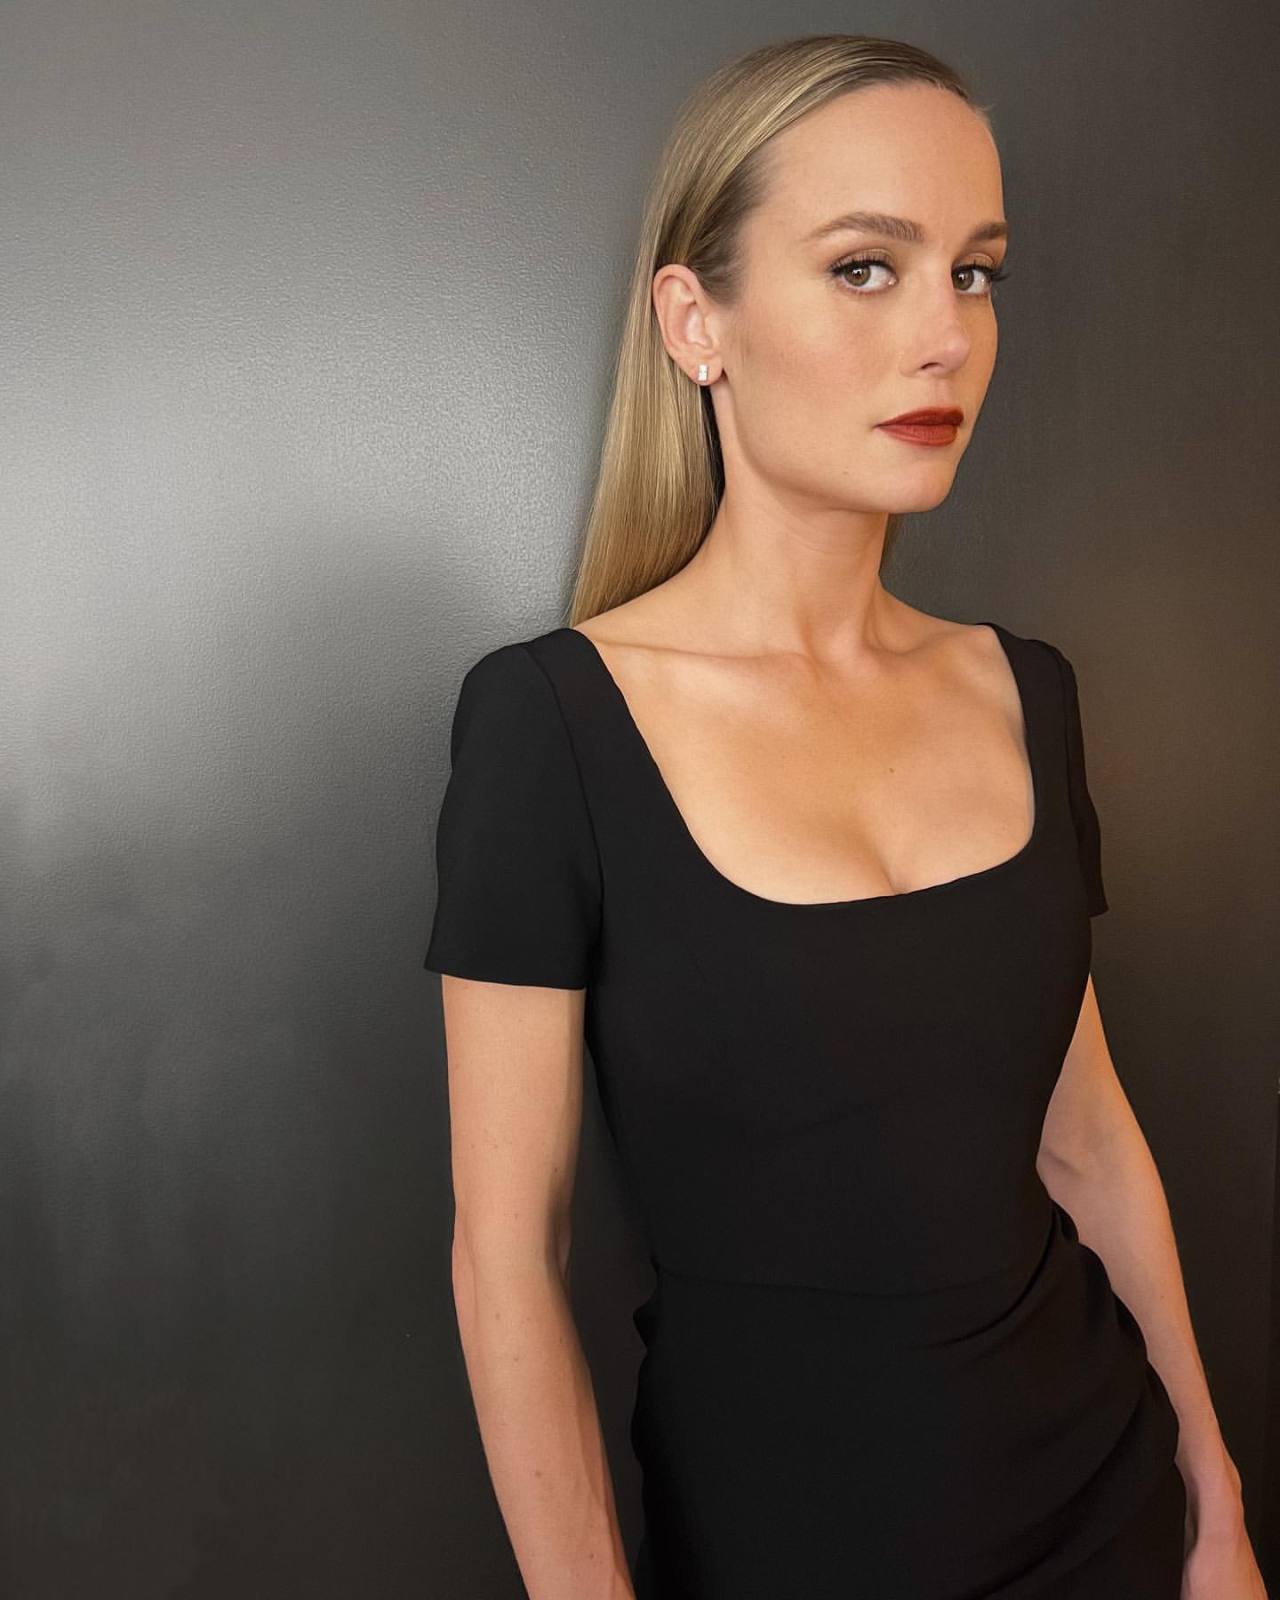 I am posting Brie Larson because of this one dress she wore at Cannes that I keep thinking about. It's the one in the 